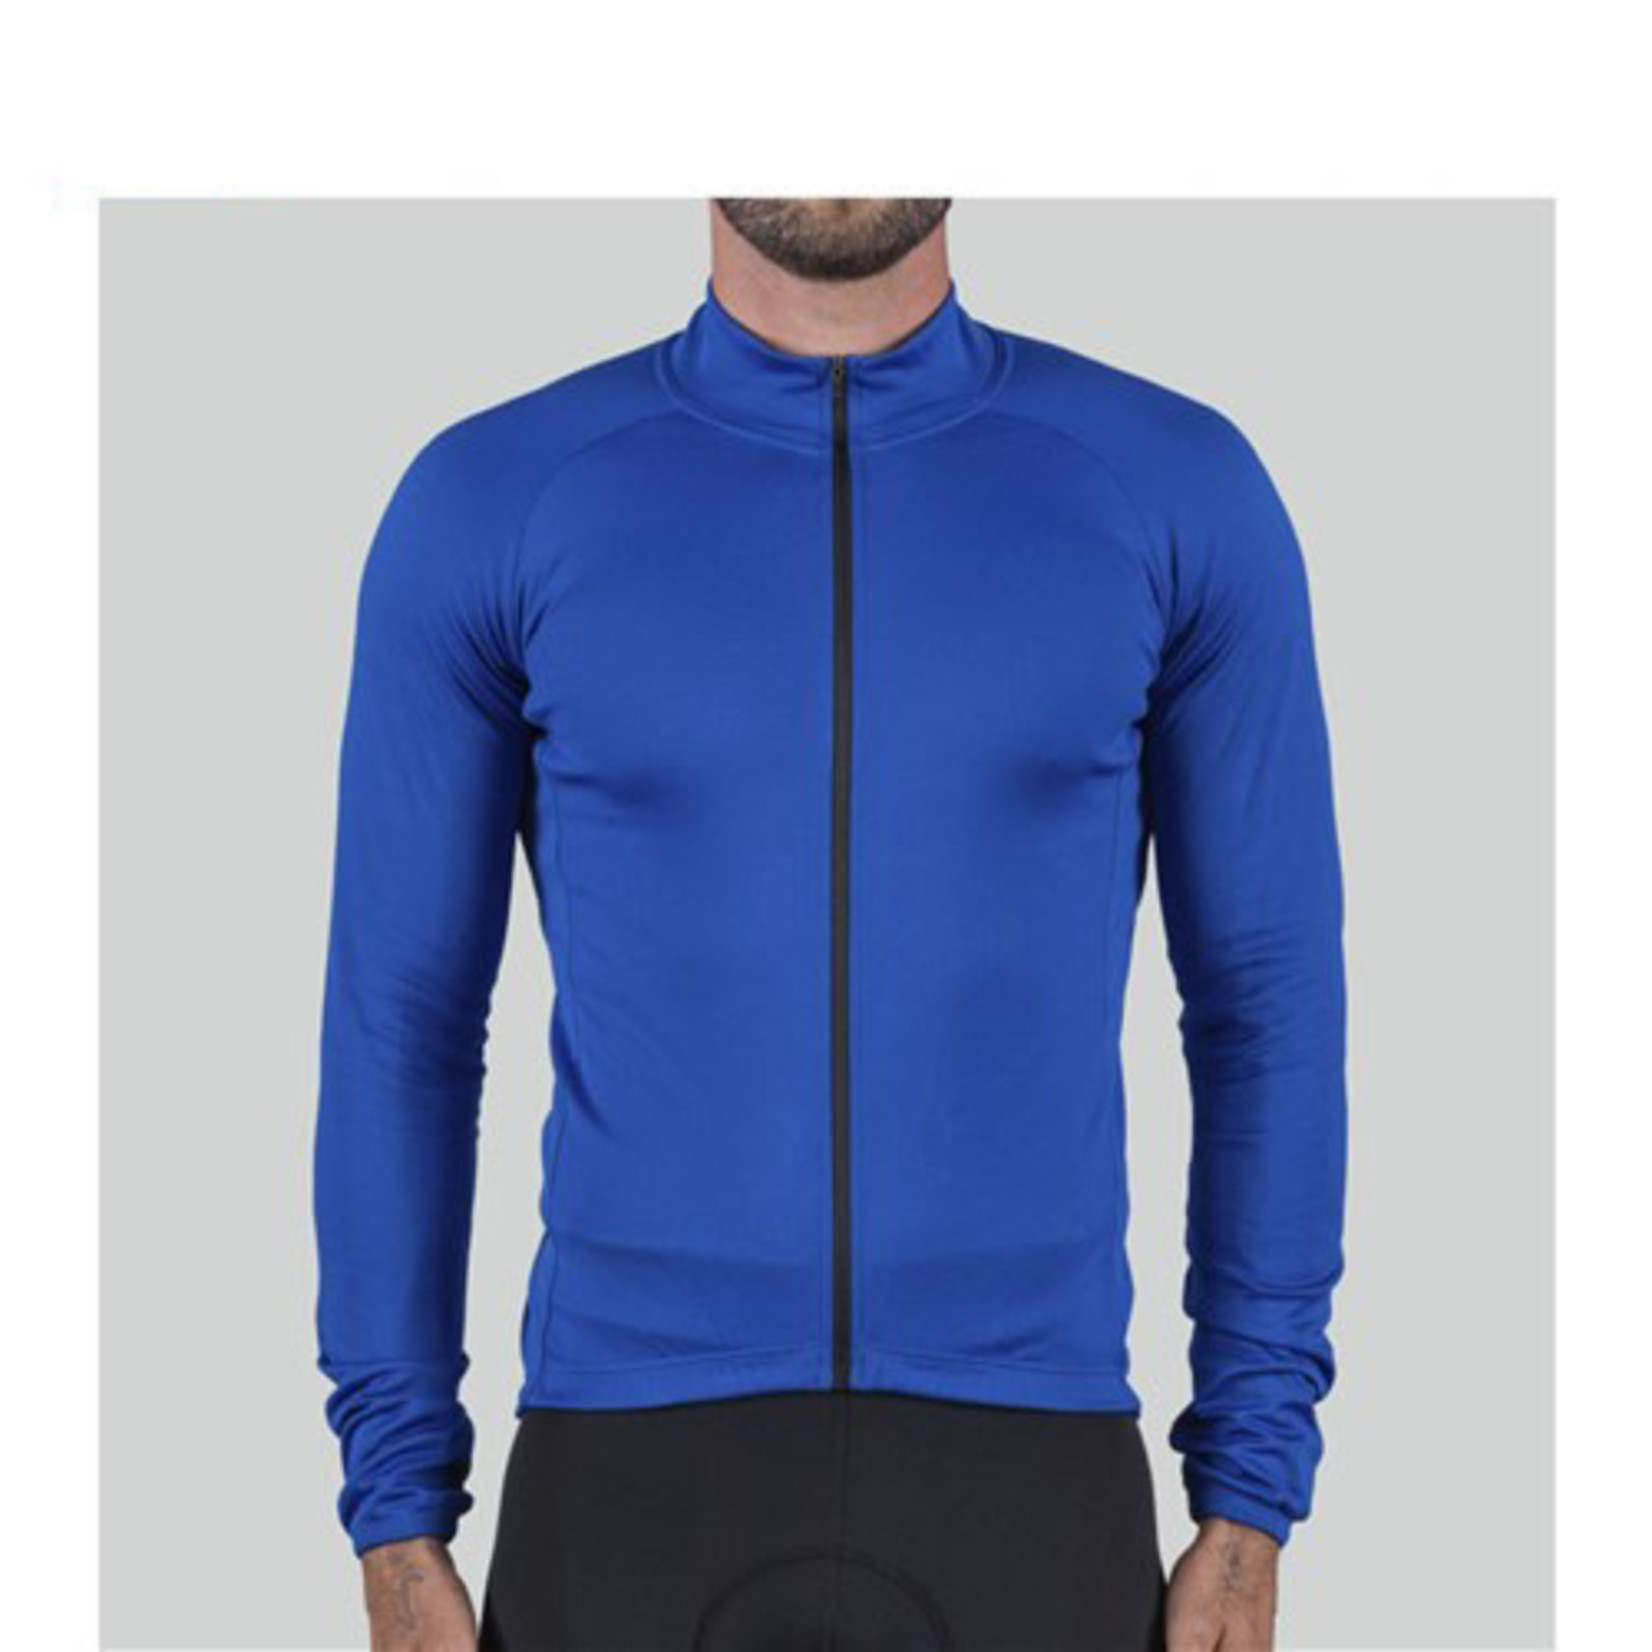 Bellwether Bellwether Thermal Draft Men's Semi-Fitted Long Sleeve Jersey - Royal